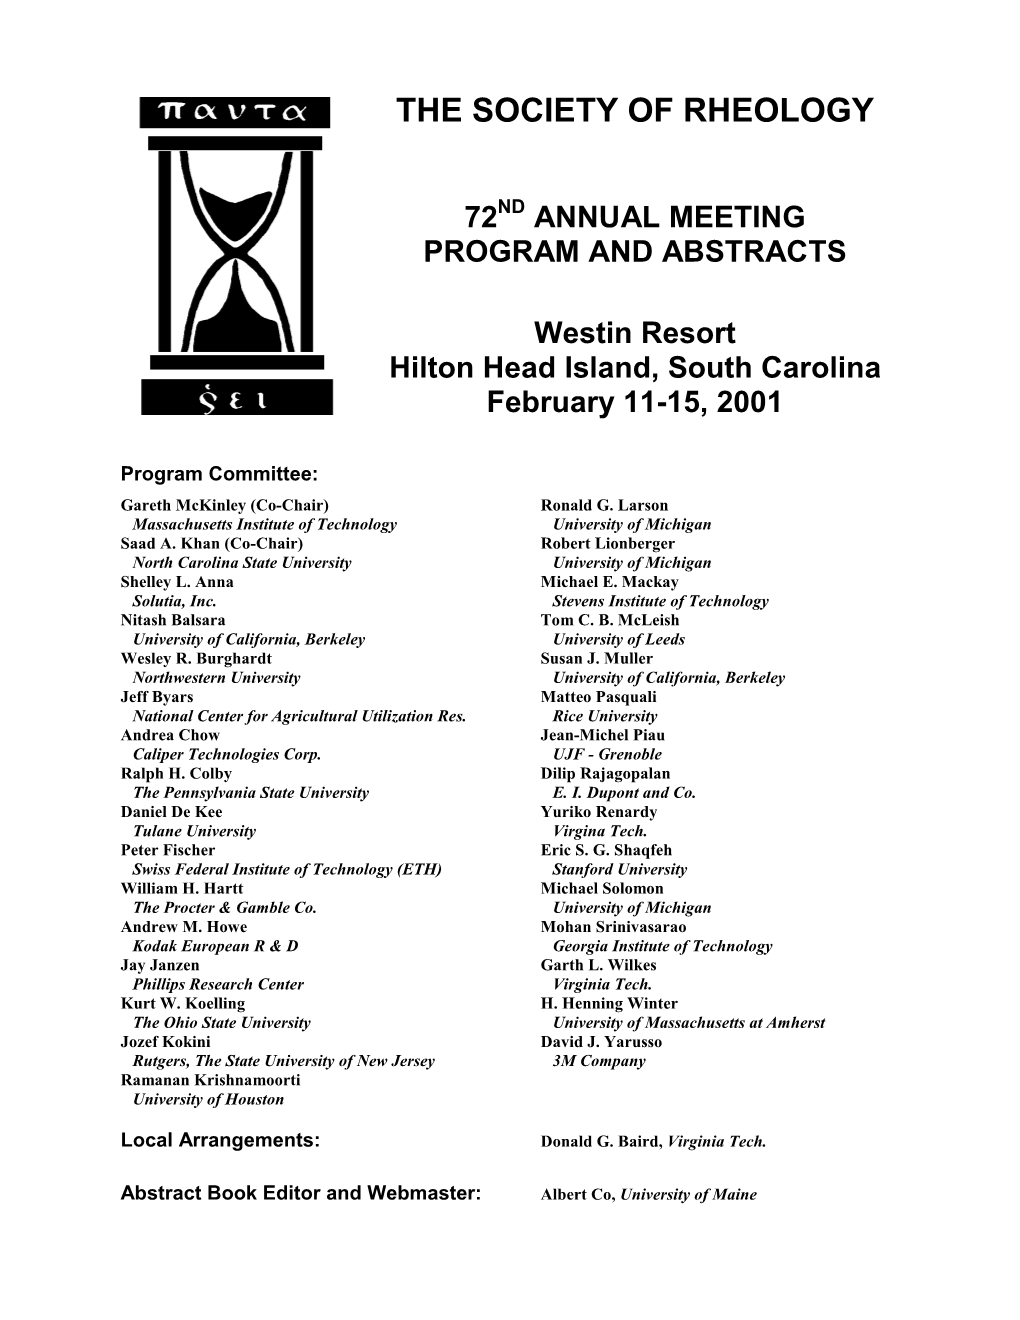 The Society of Rheology 72Nd Annual Meeting Program and Abstracts